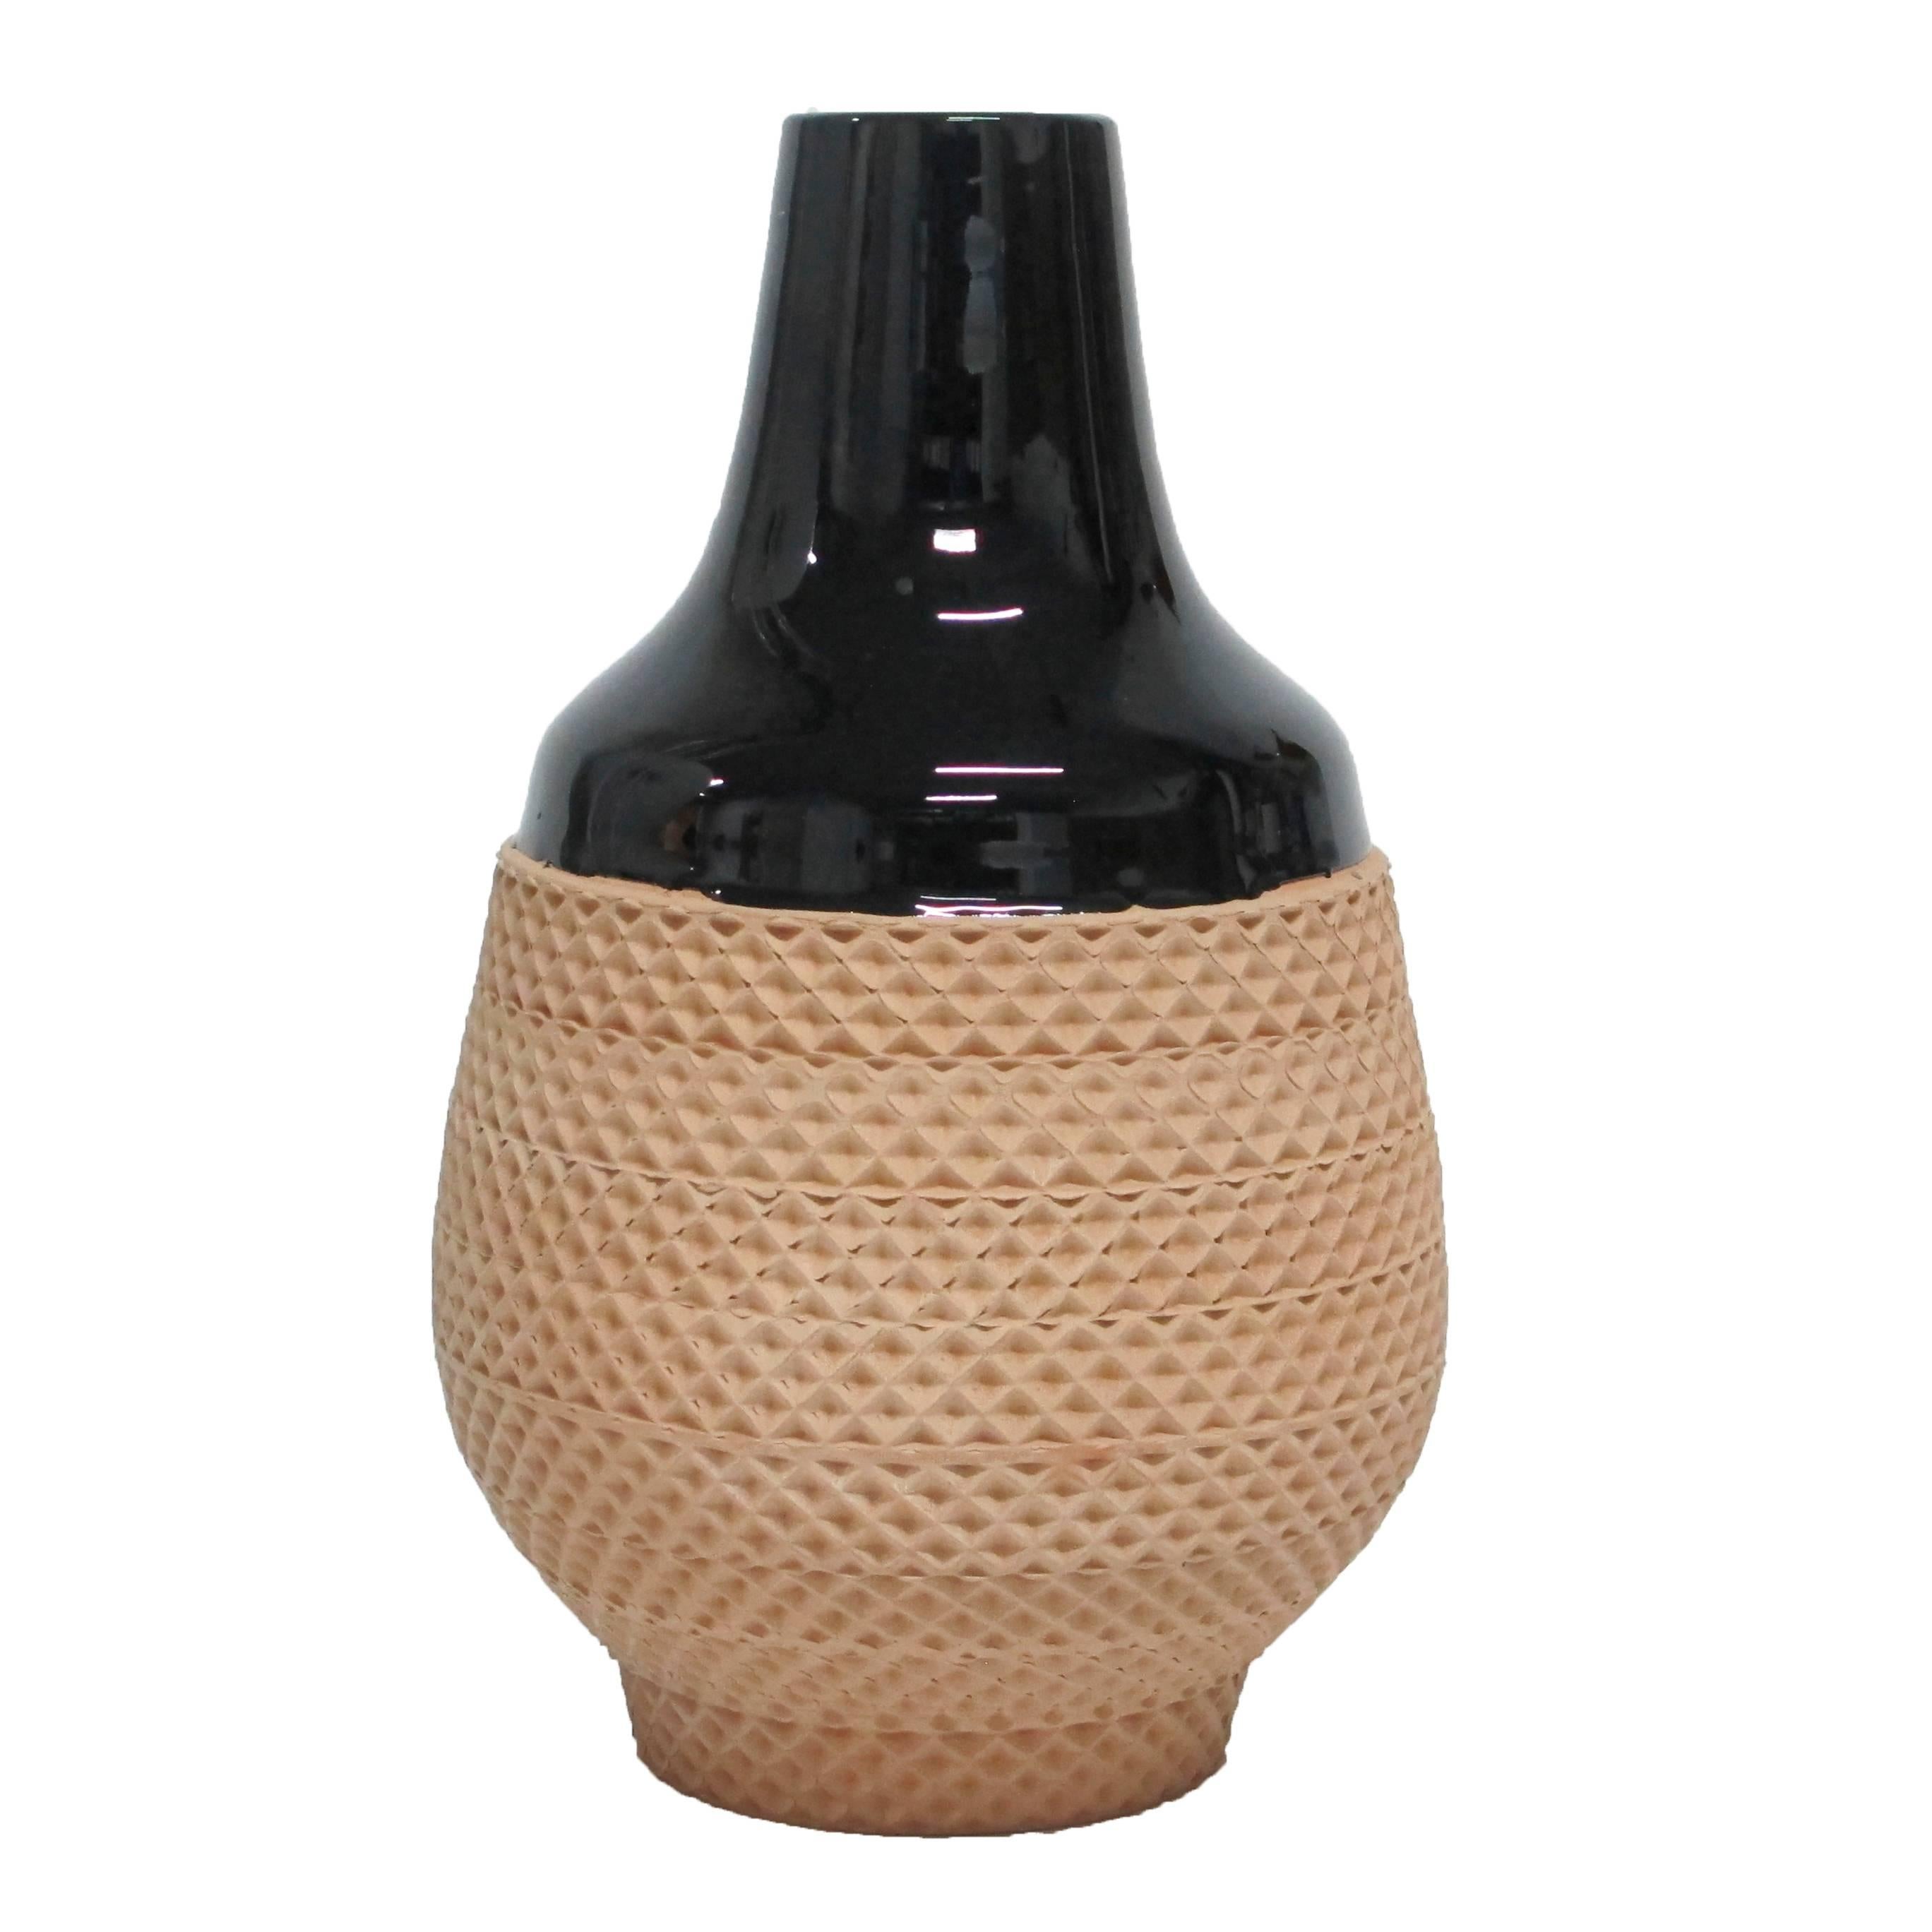 Bitossi ceramic vase black glaze impressed terracotta signed, Italy, 1970s. The neck and shoulders of the vase have a glossy black glaze contrasted by a unglazed terracotta waist, belly and foot. Measures 10 inches in height by 6 inches across the